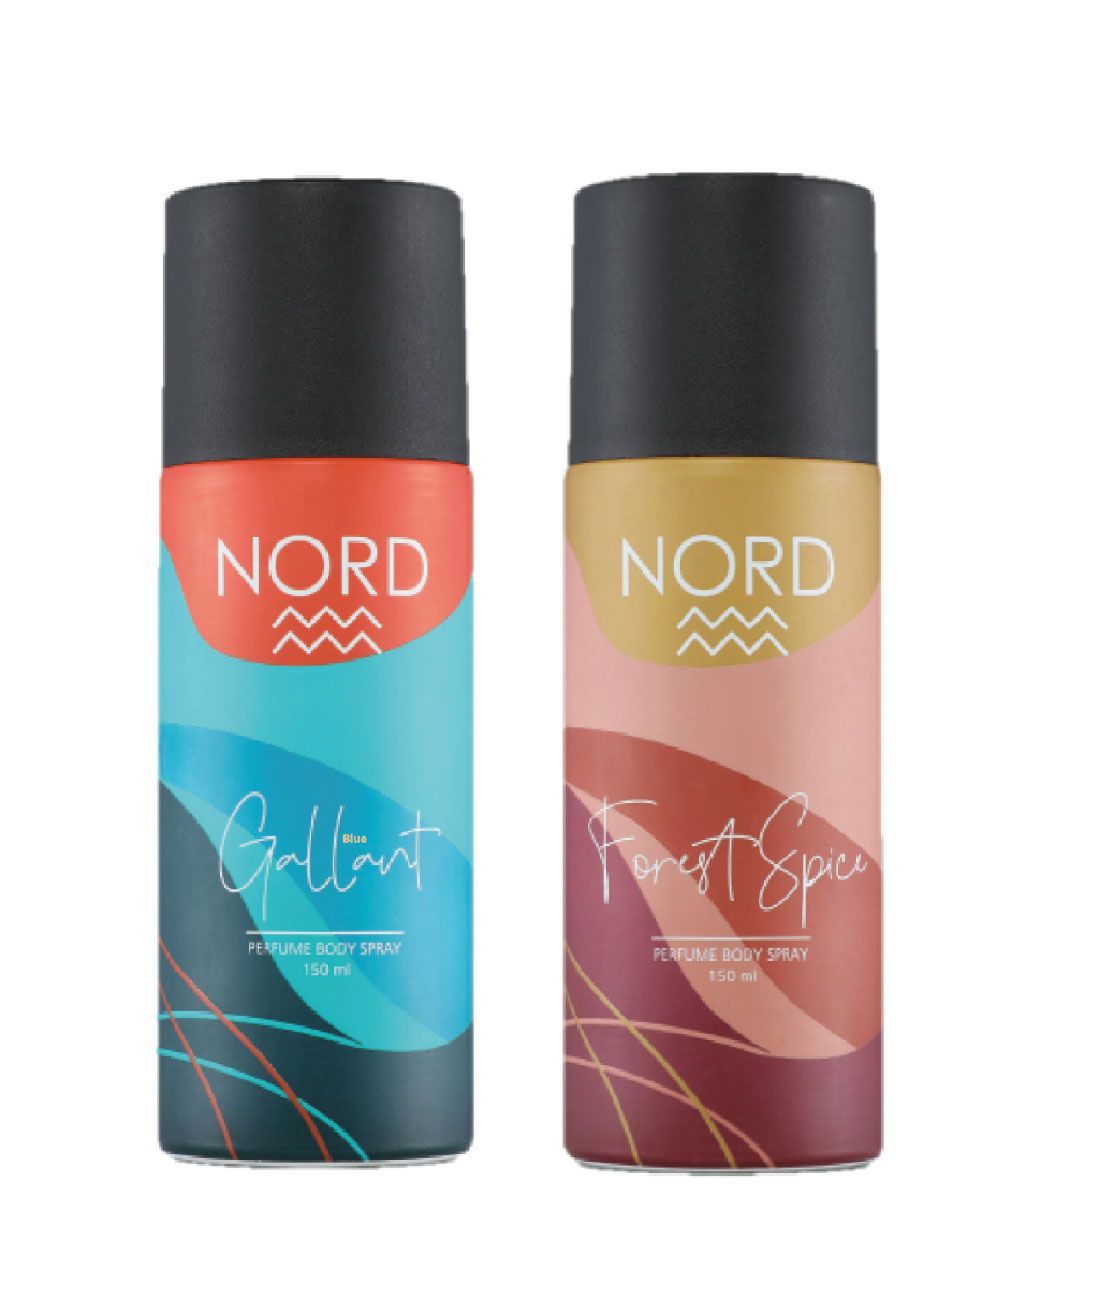     			NORD Deodorant Body Spray - Gallant and Forest Spice 150 ml each (Pack of 2)